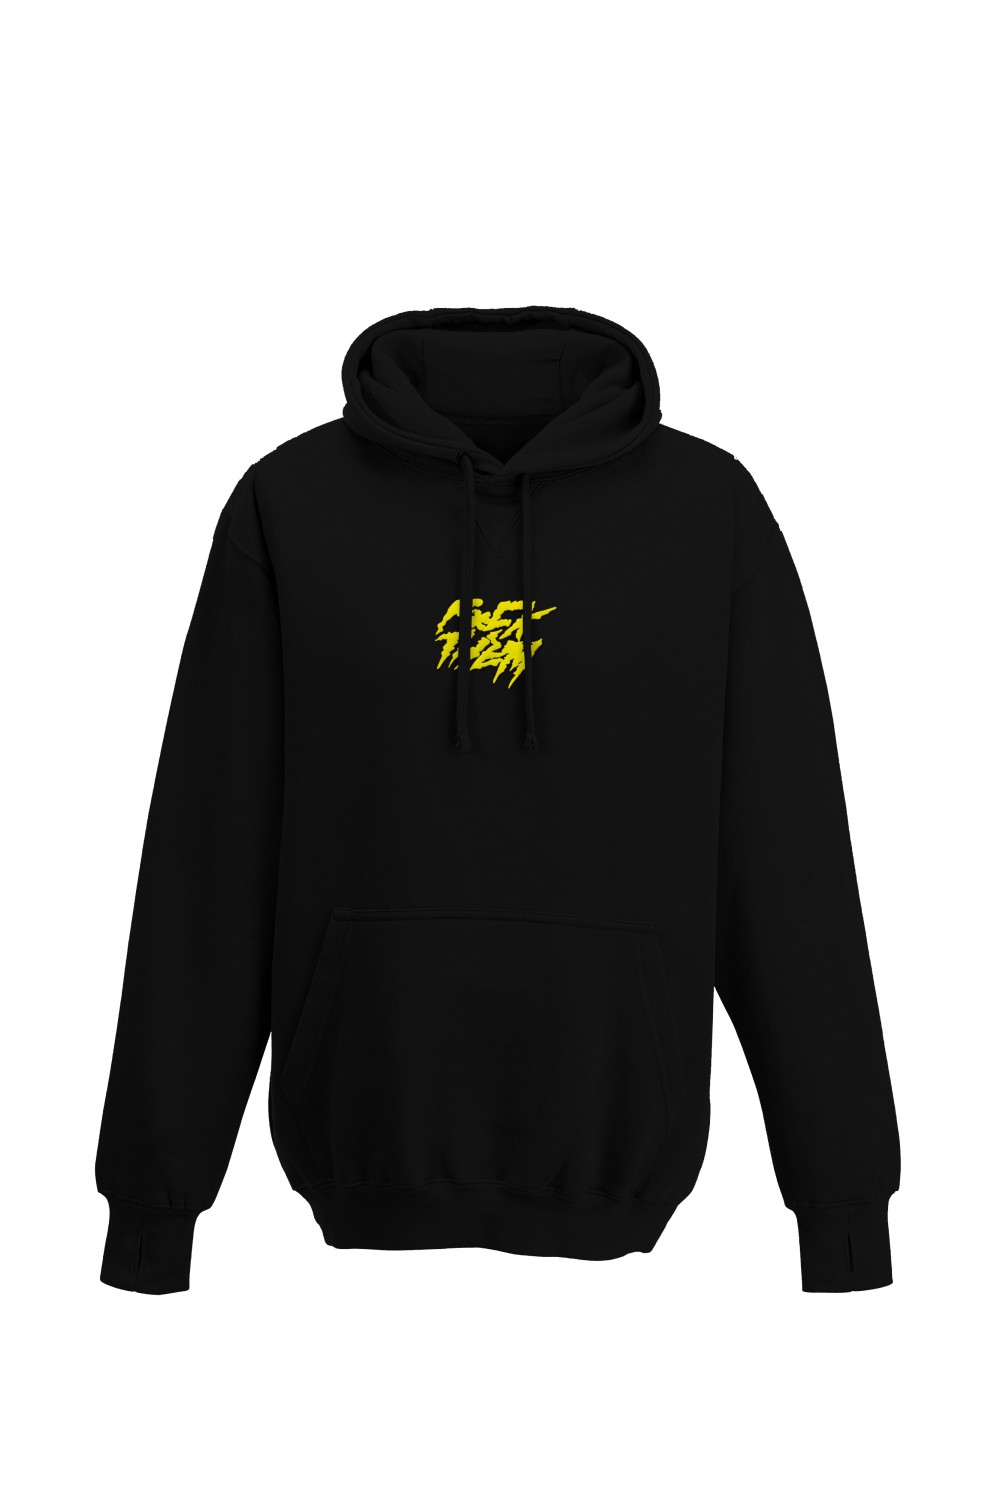 Black/yellow winter pt.2 (limited)